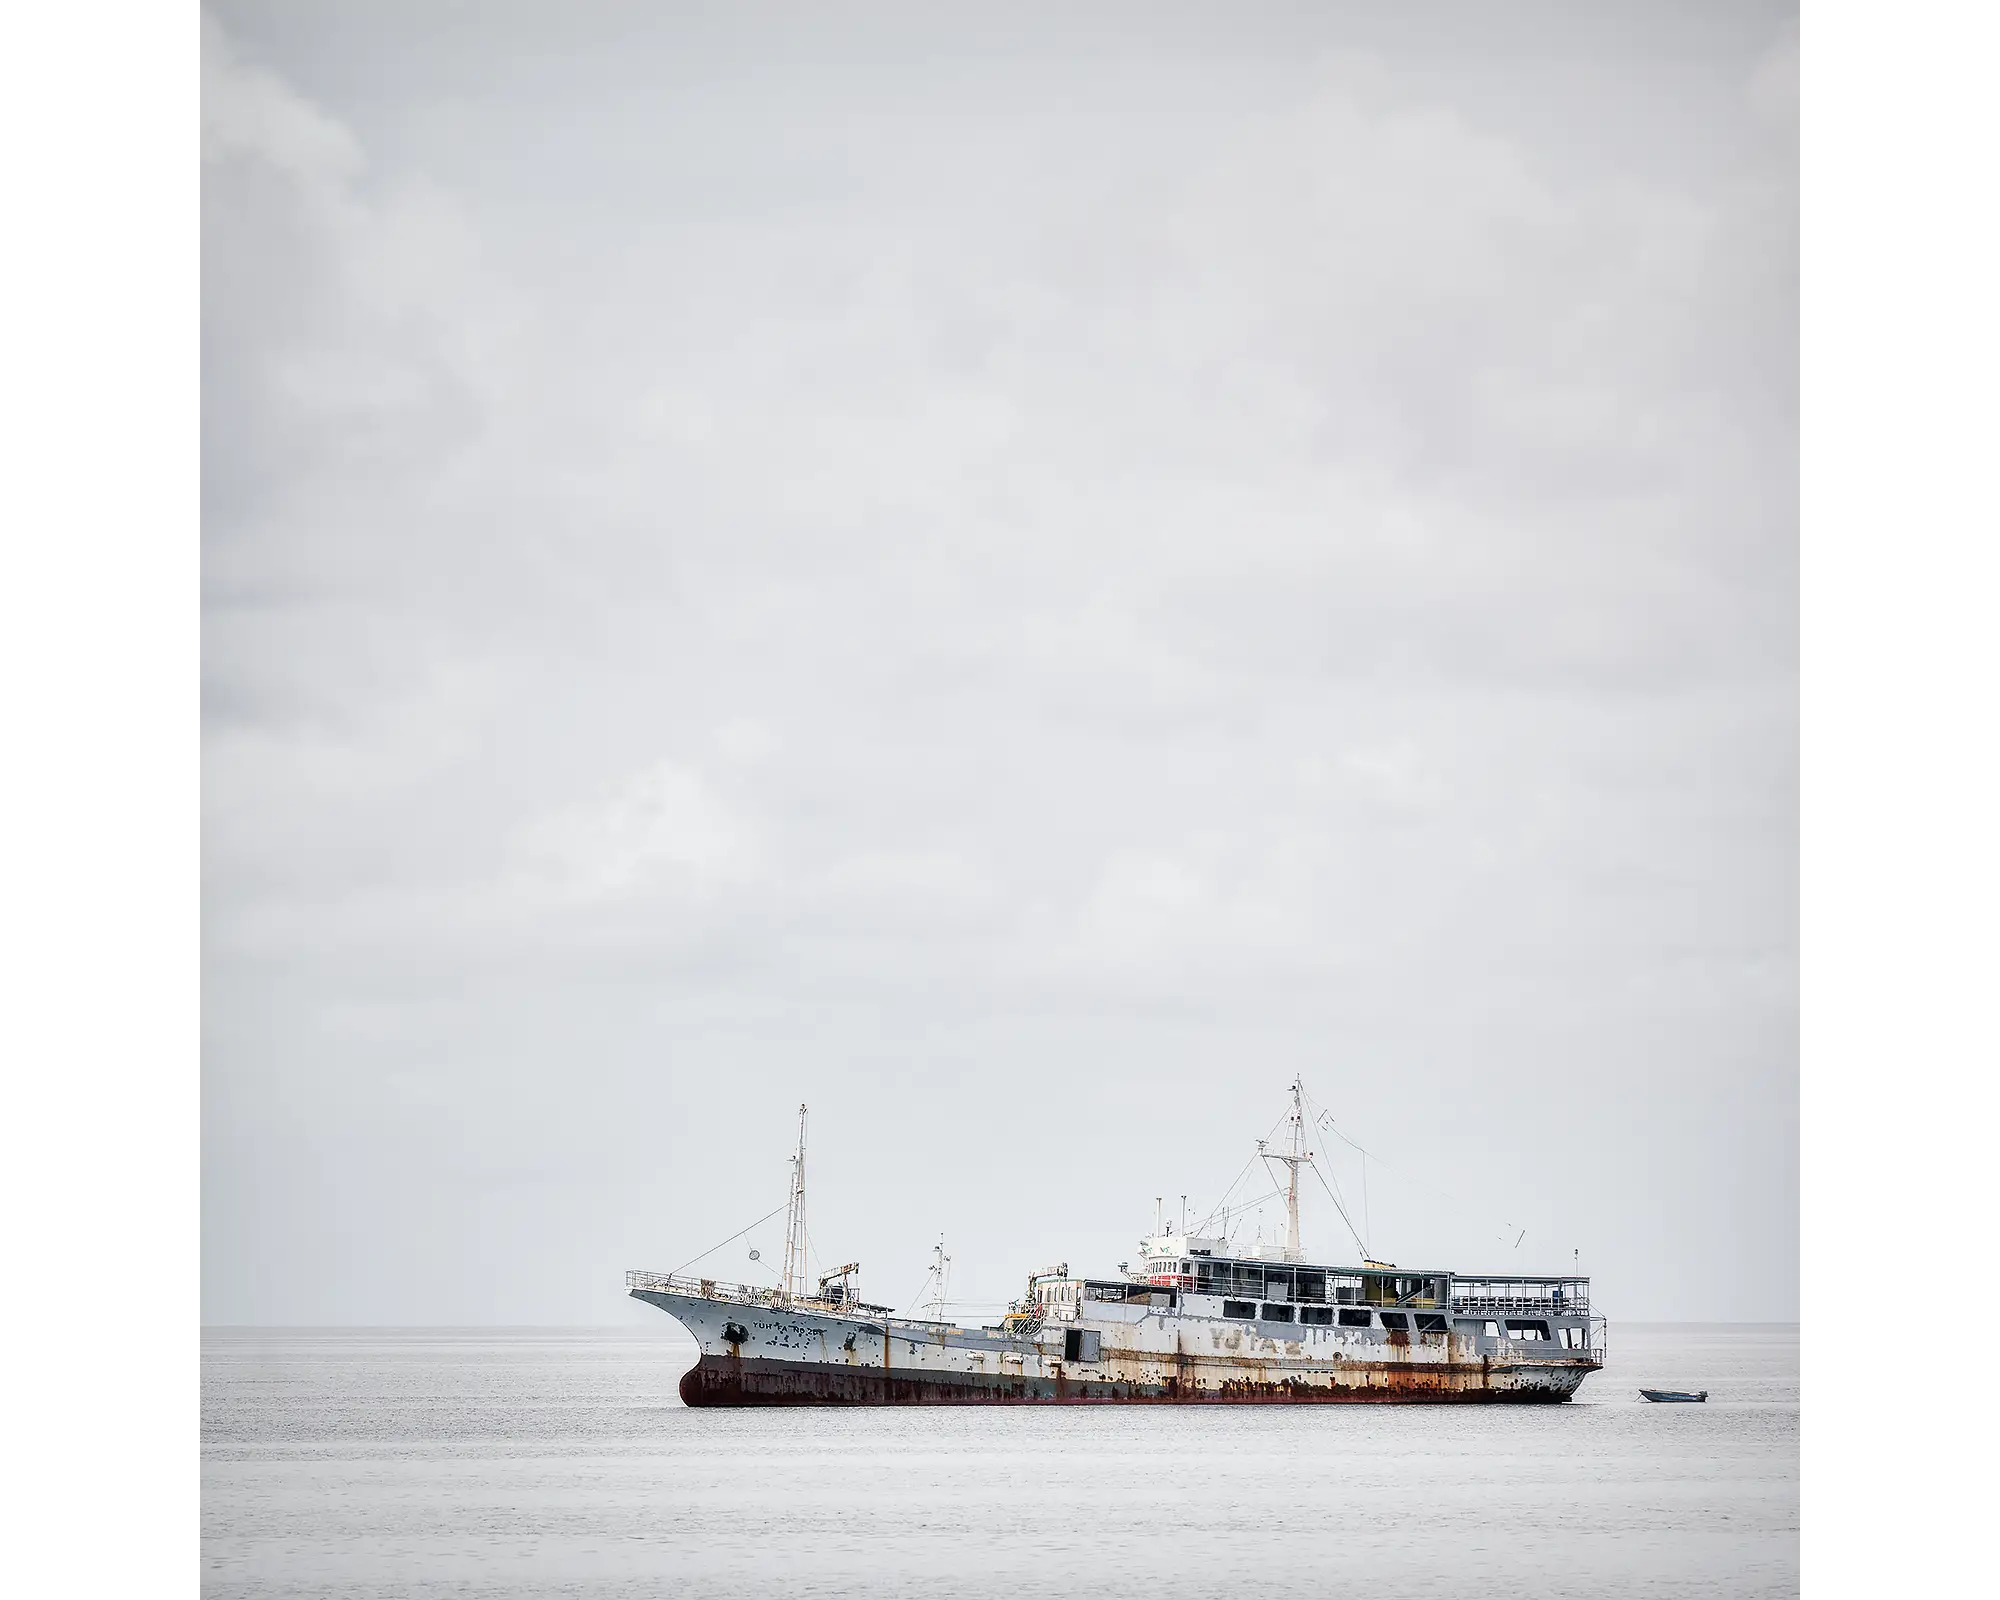 Uncertainty. Old boat on floating on water in Honiara, Soloman Island.